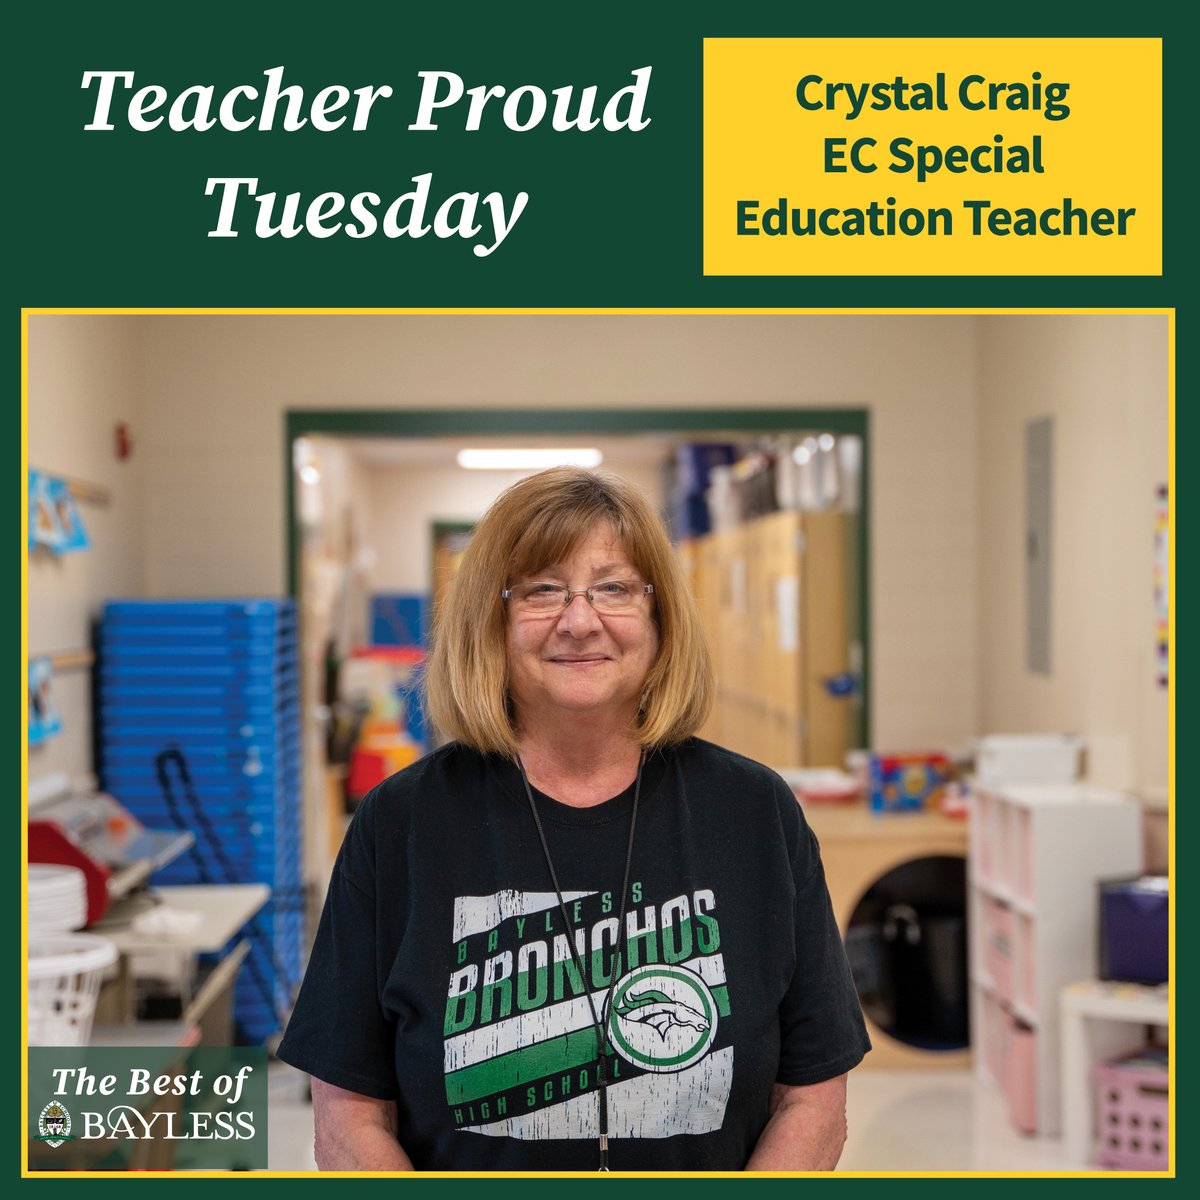 This #TeacherProudTuesday is for the Early Childhood Center's Crystal Craig! Miss Crystal is an ECSE teacher in the Green Room.

She has a passion for supporting others, both students and staff. Thank you for all that you do, Miss Crystal!

#BringTheStampede